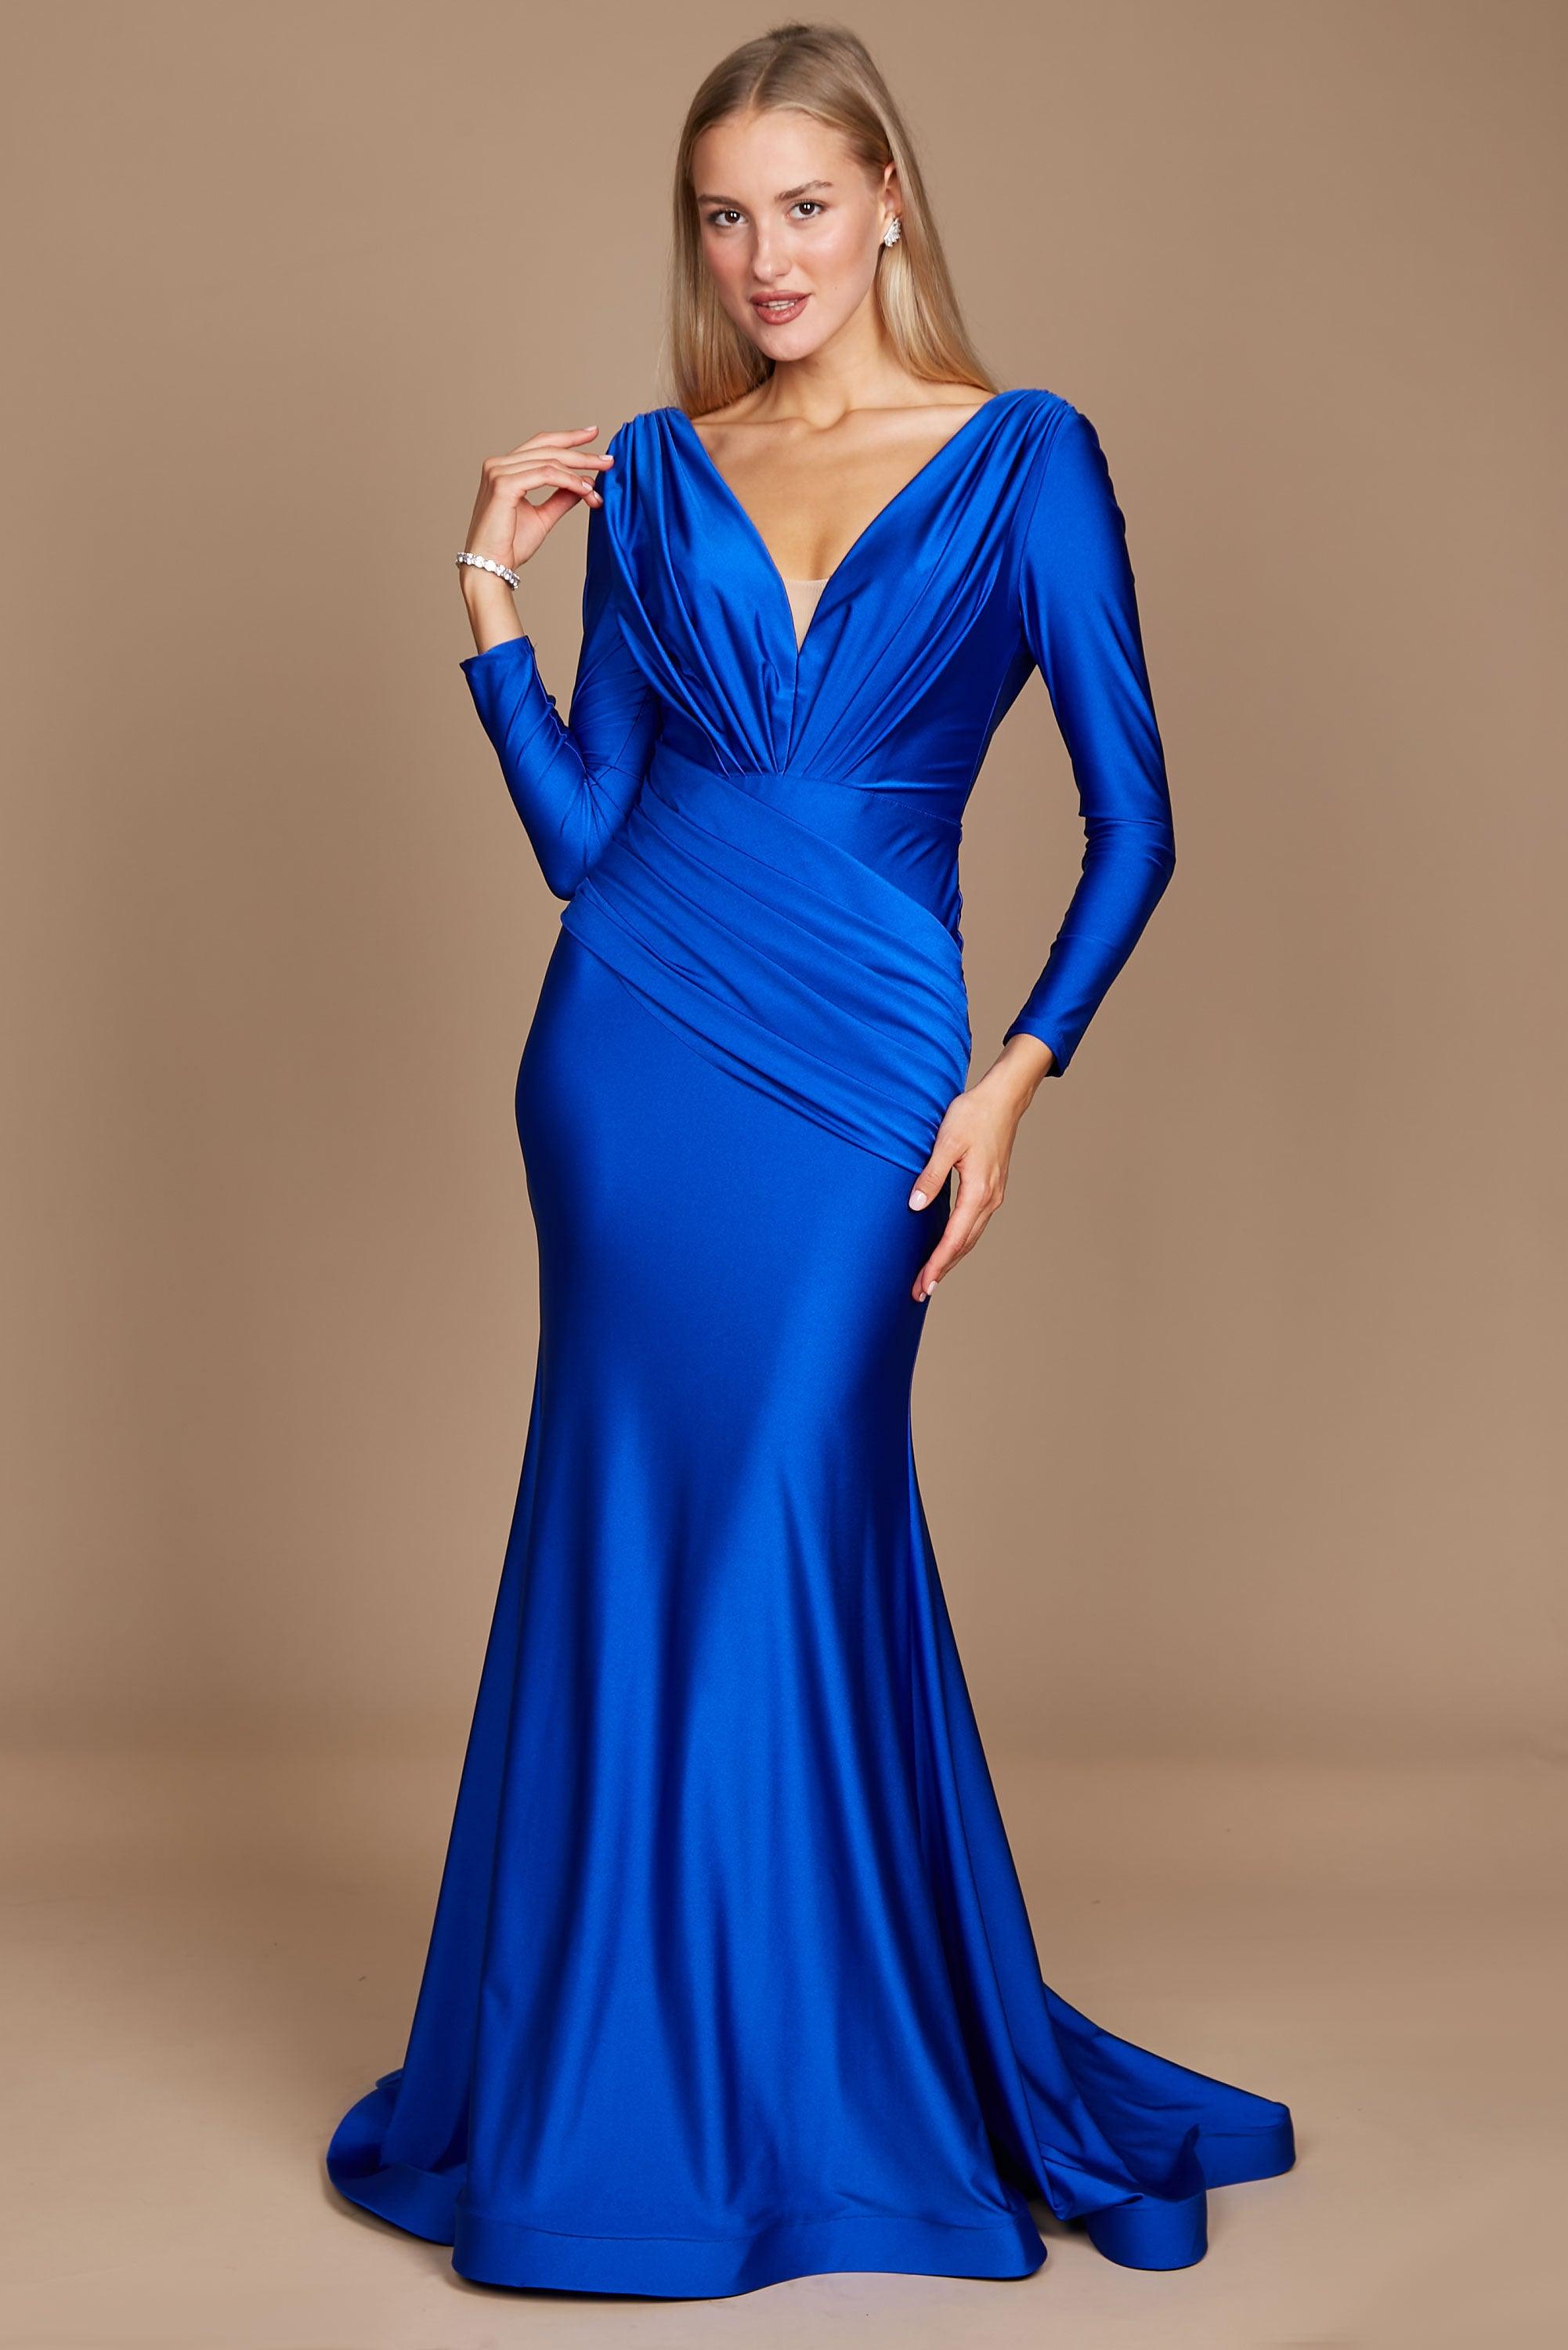 Blue Satin Strapless A-Line Long Prom Dress with Puff Sleeves – Dreamdressy